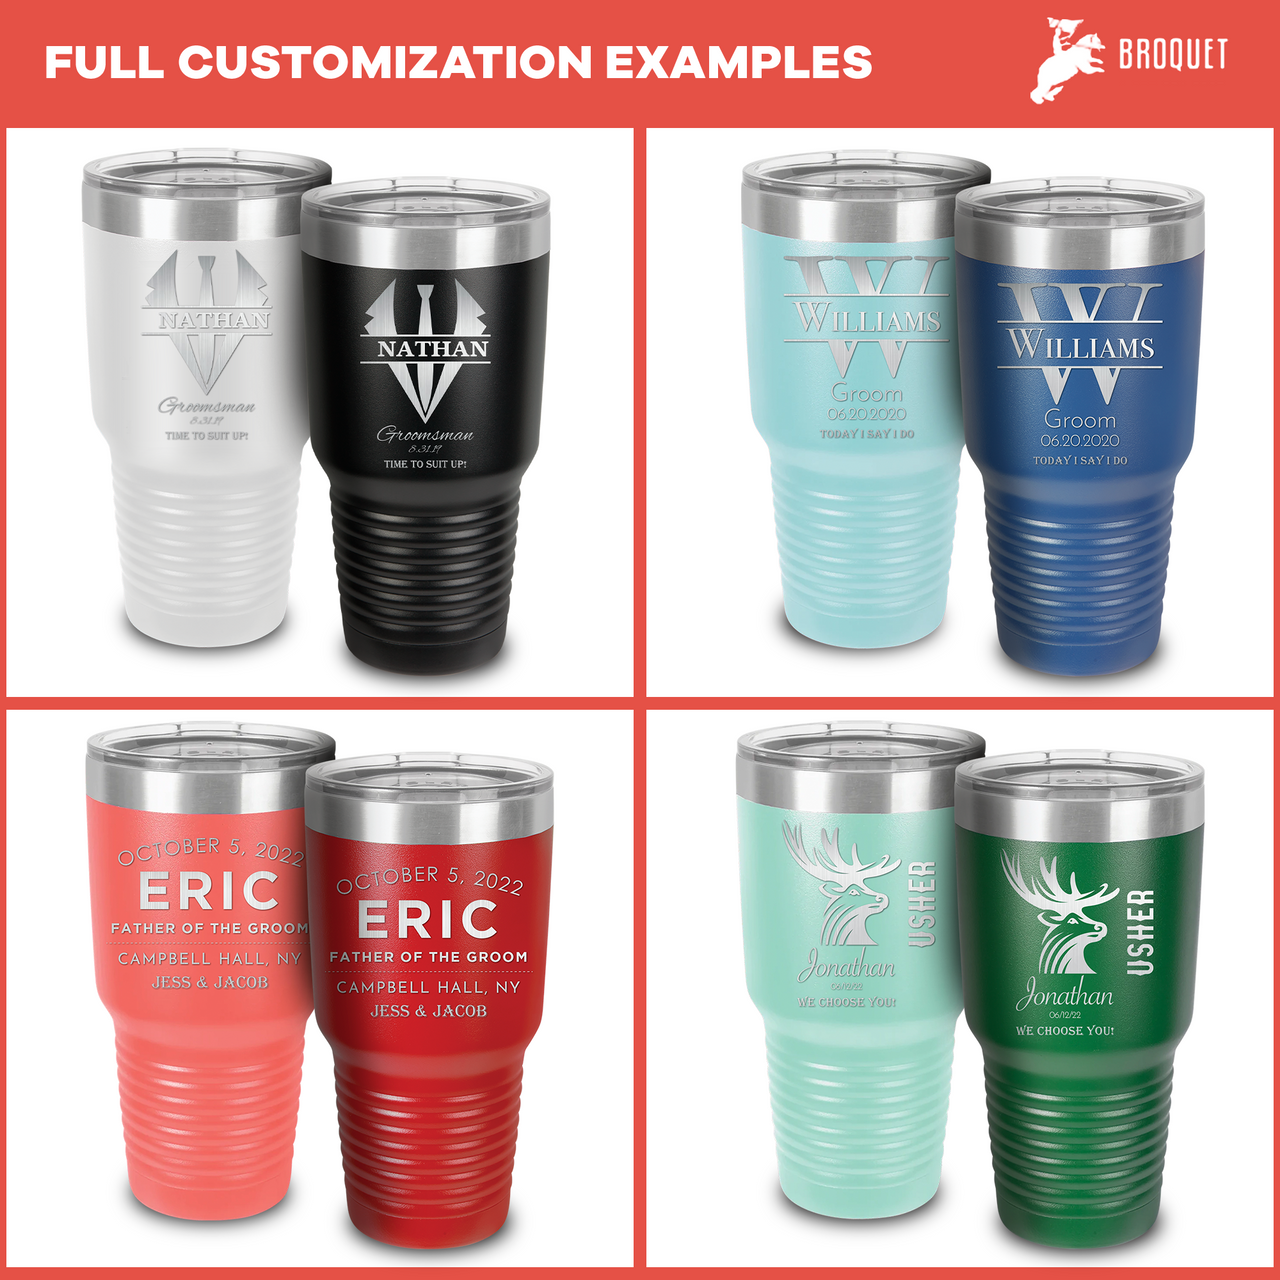 Stainless Steel Groomsmen Tumbler - Personalized and Insulated Gift for Men - Ideal for Weddings and Bulk Orders